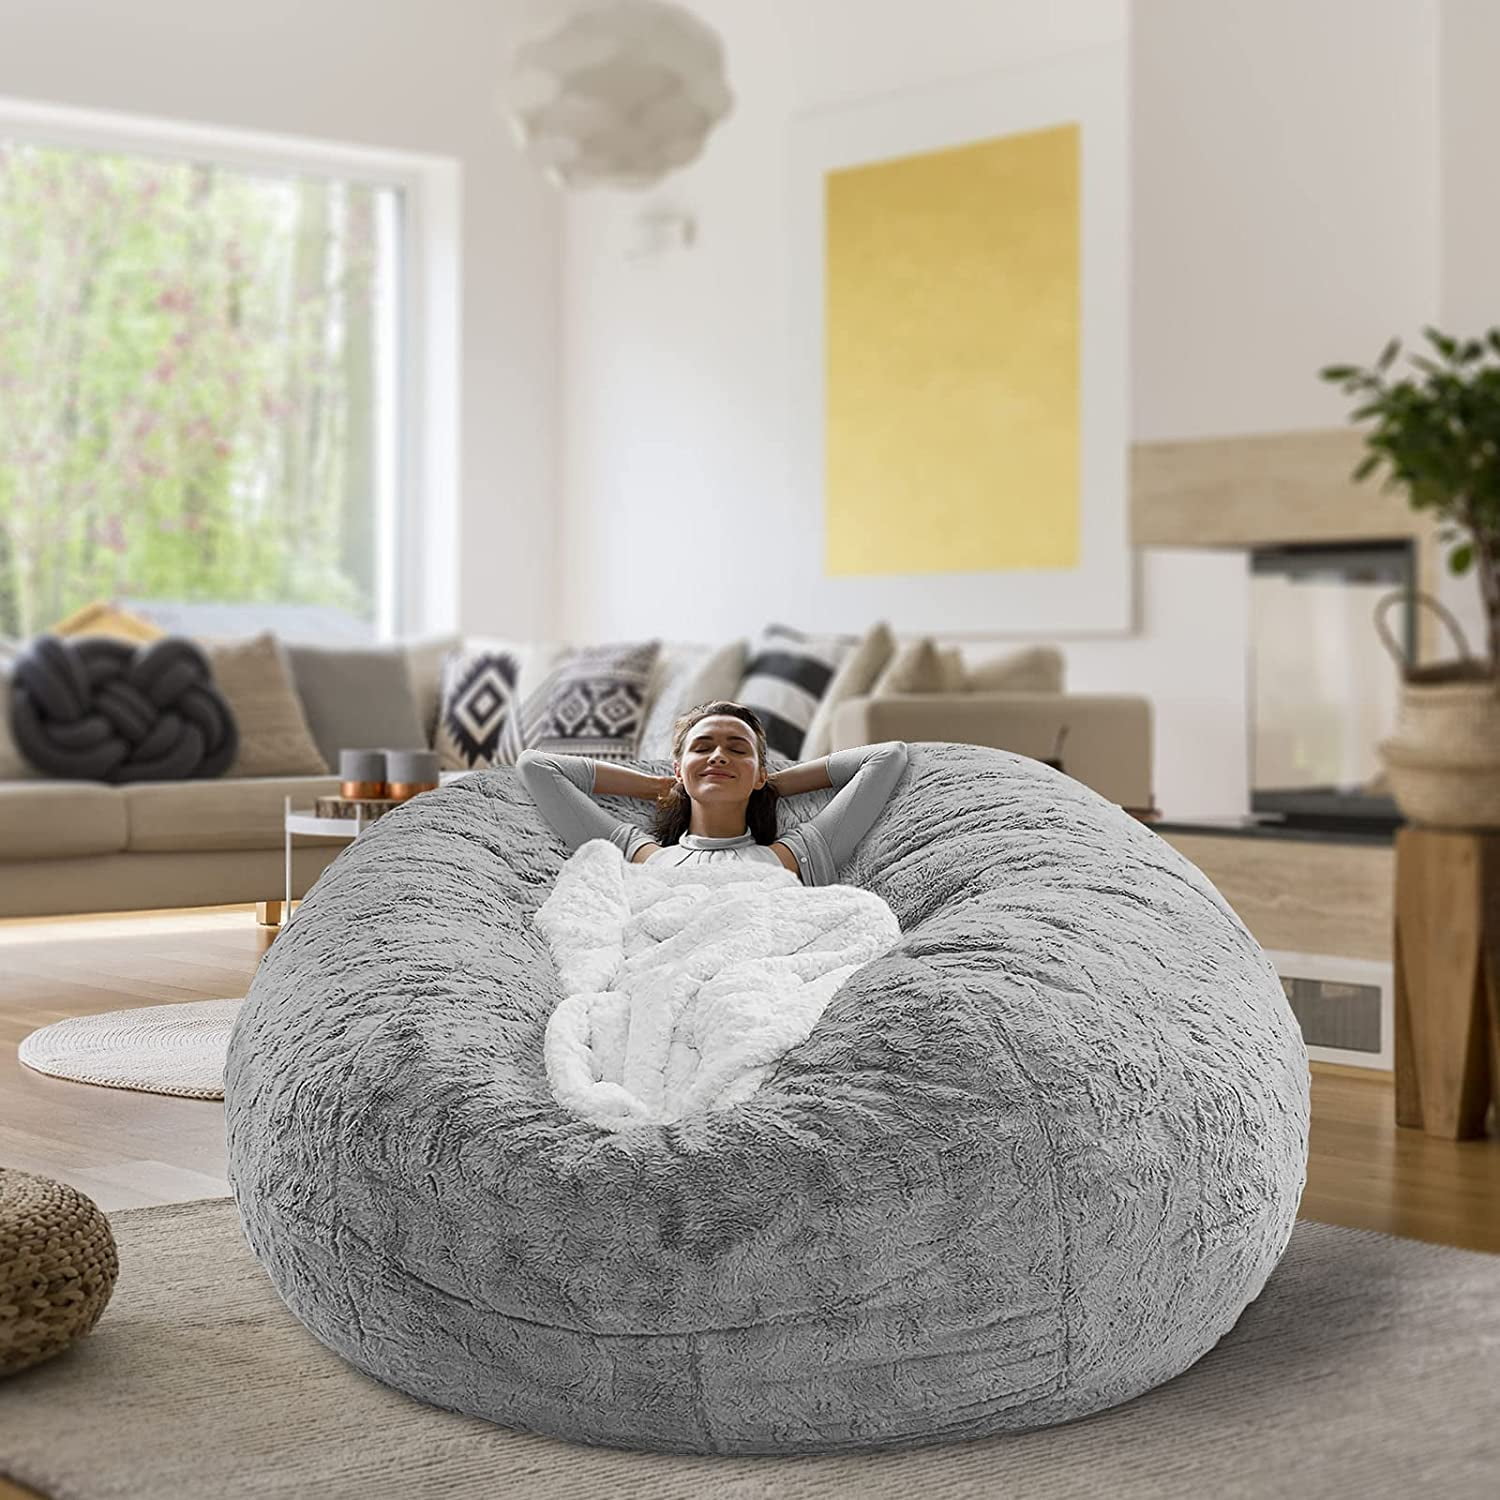 EKWQ 5FT Bean Bag Chair Cover(it was only a Cover, not a Full Bean Bag)  Living Room Furniture Big Round Soft Fluffy Faux Fur BeanBag Lazy Sofa Bed